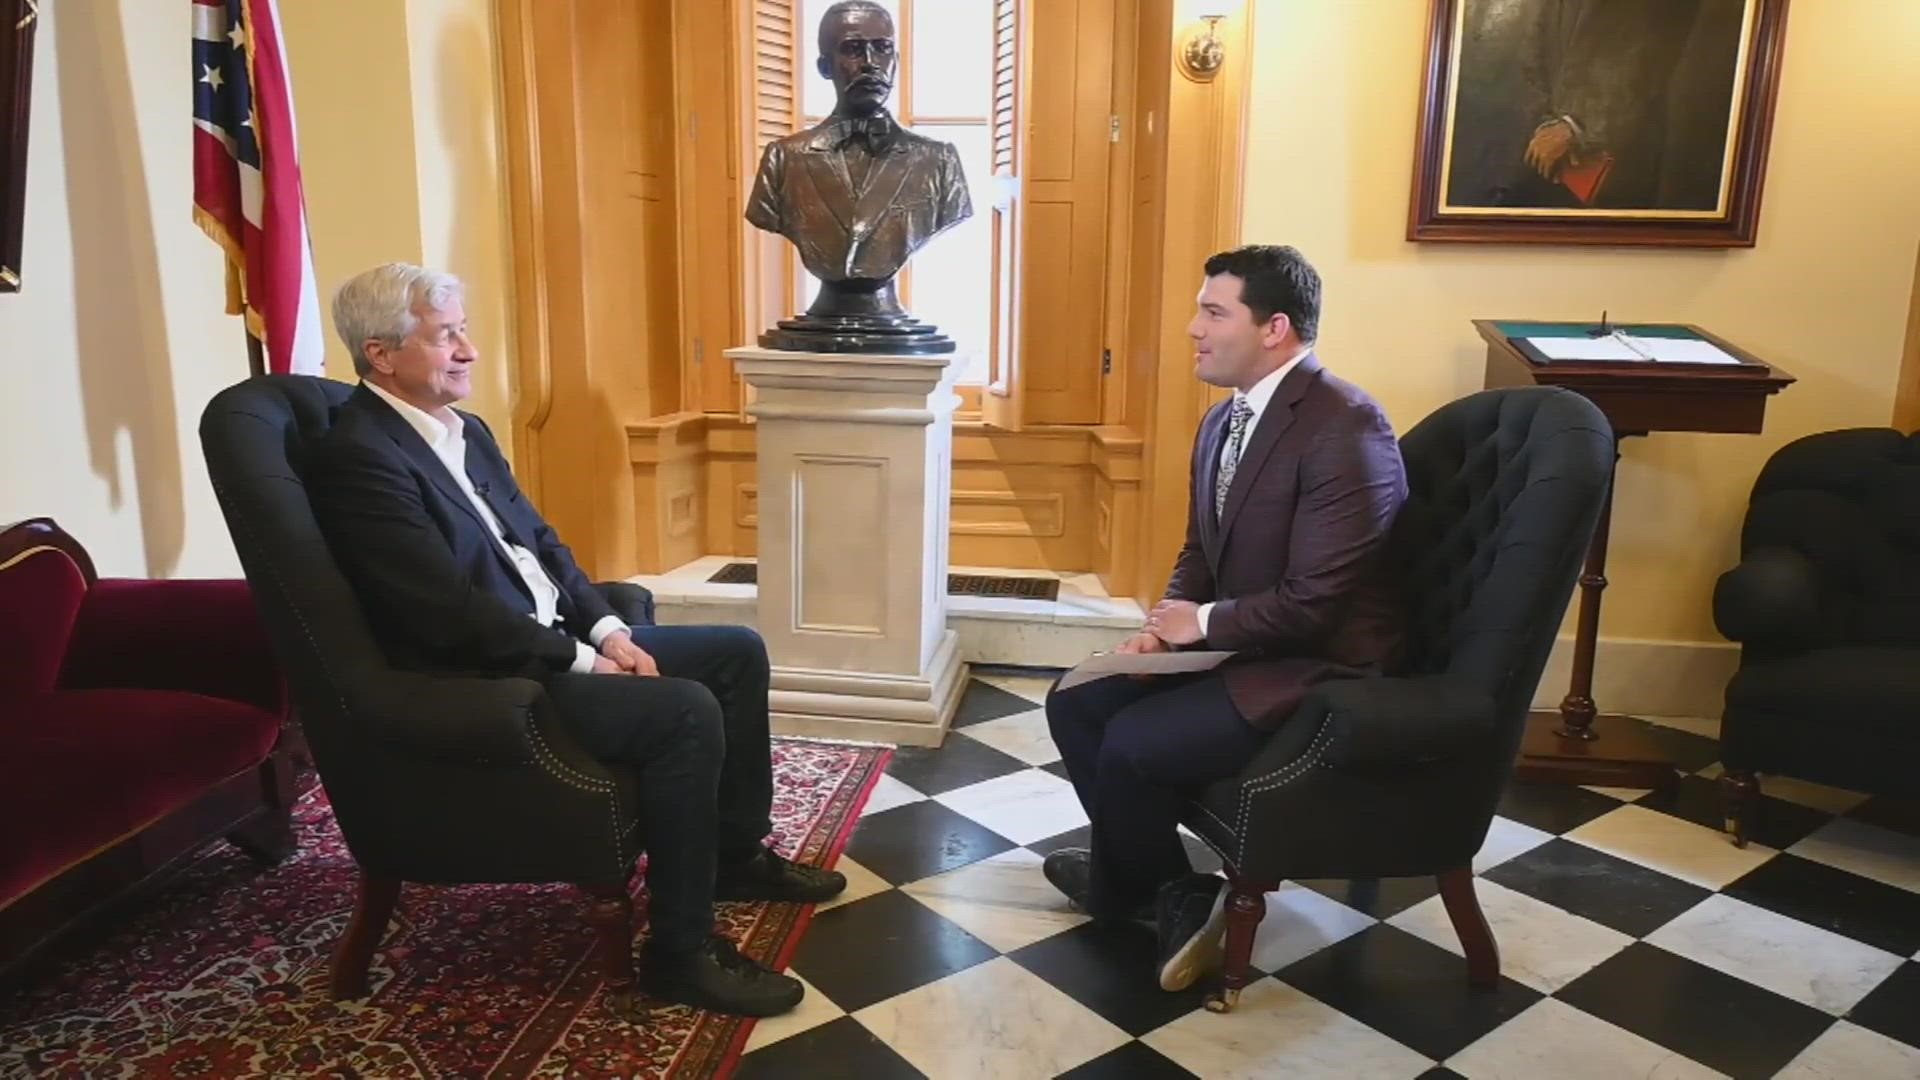 In his visit to the Ohio Chamber of Commerce 2022 State of Business Summit, JPMorgan Chase CEO  Jamie Dimon made time to talk to 10TV’s Clay Gordon.